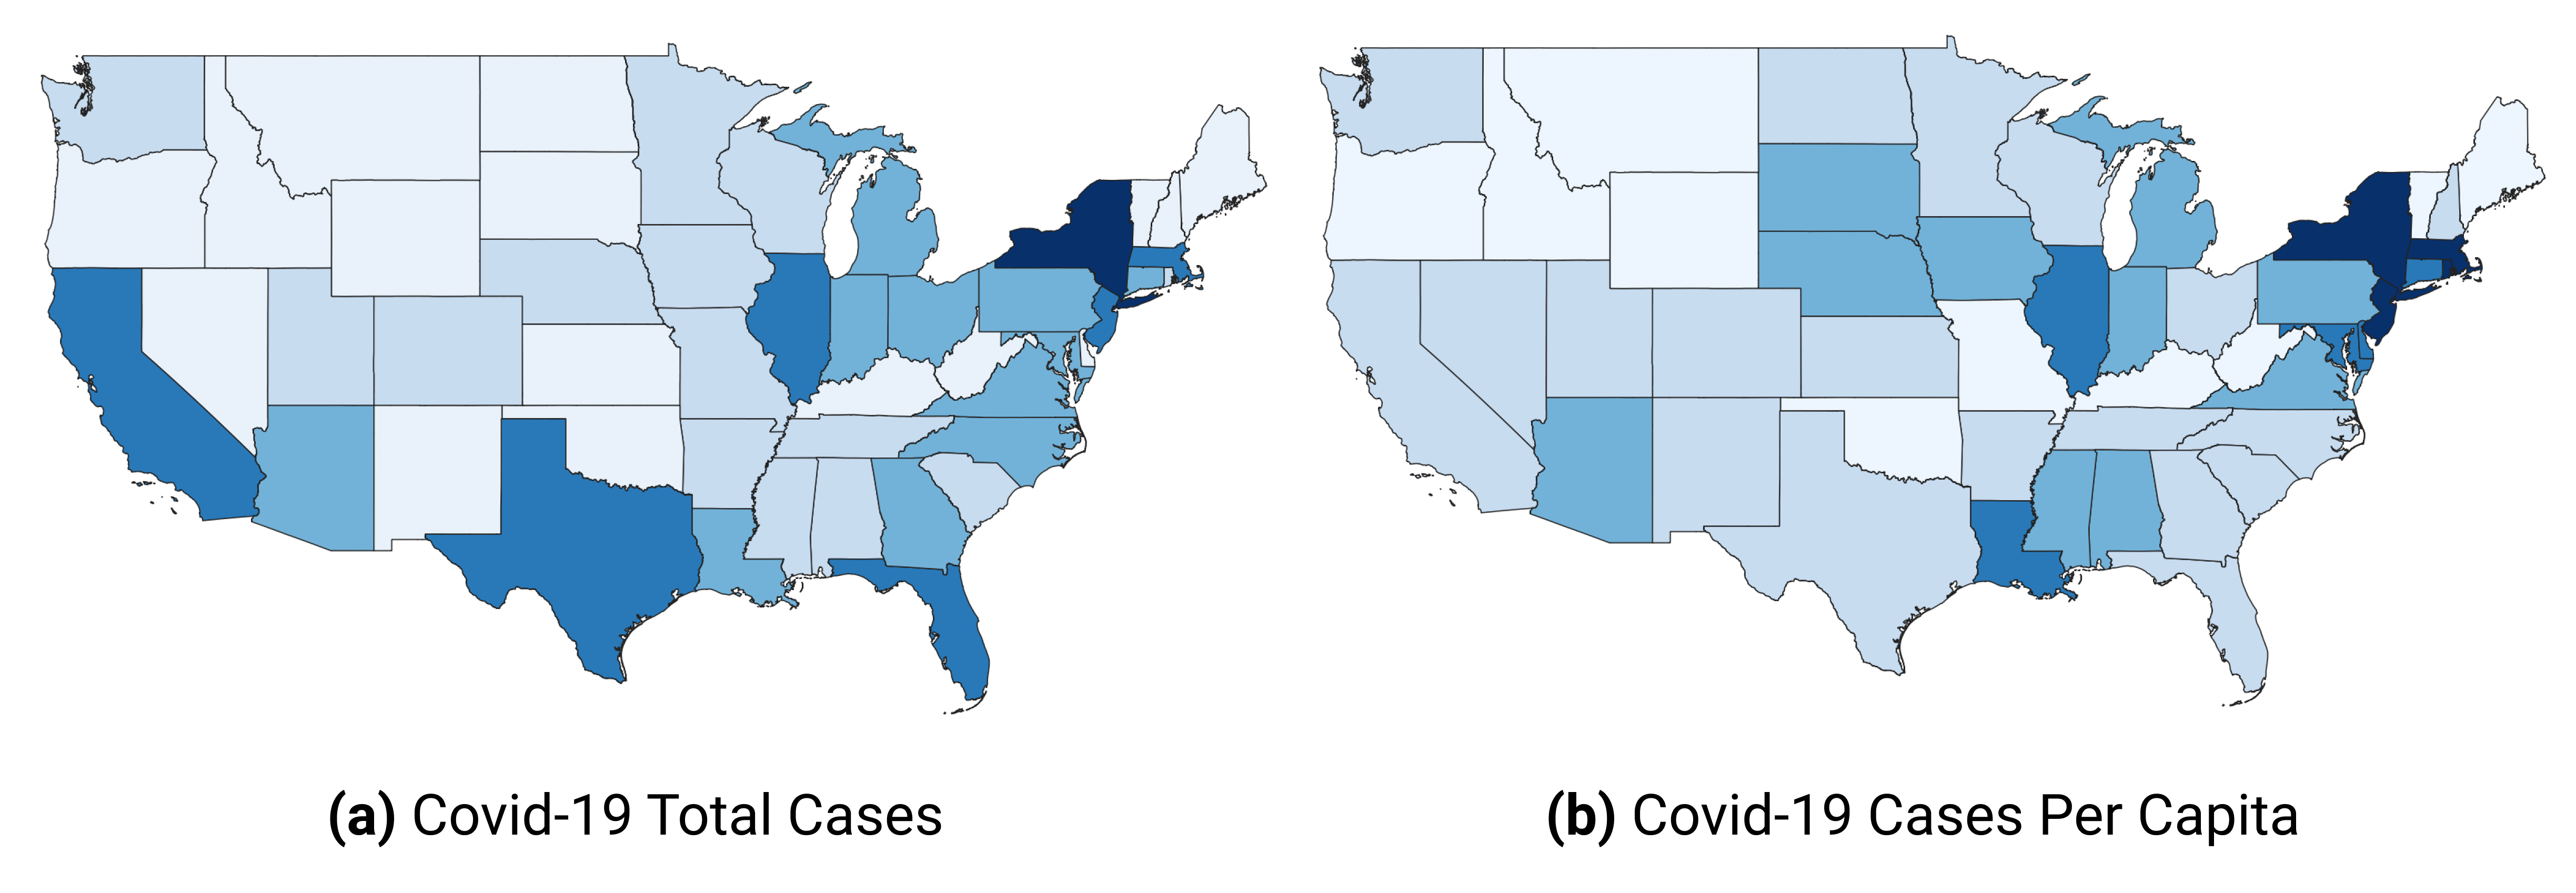 Choropleth maps work best with normalized values.